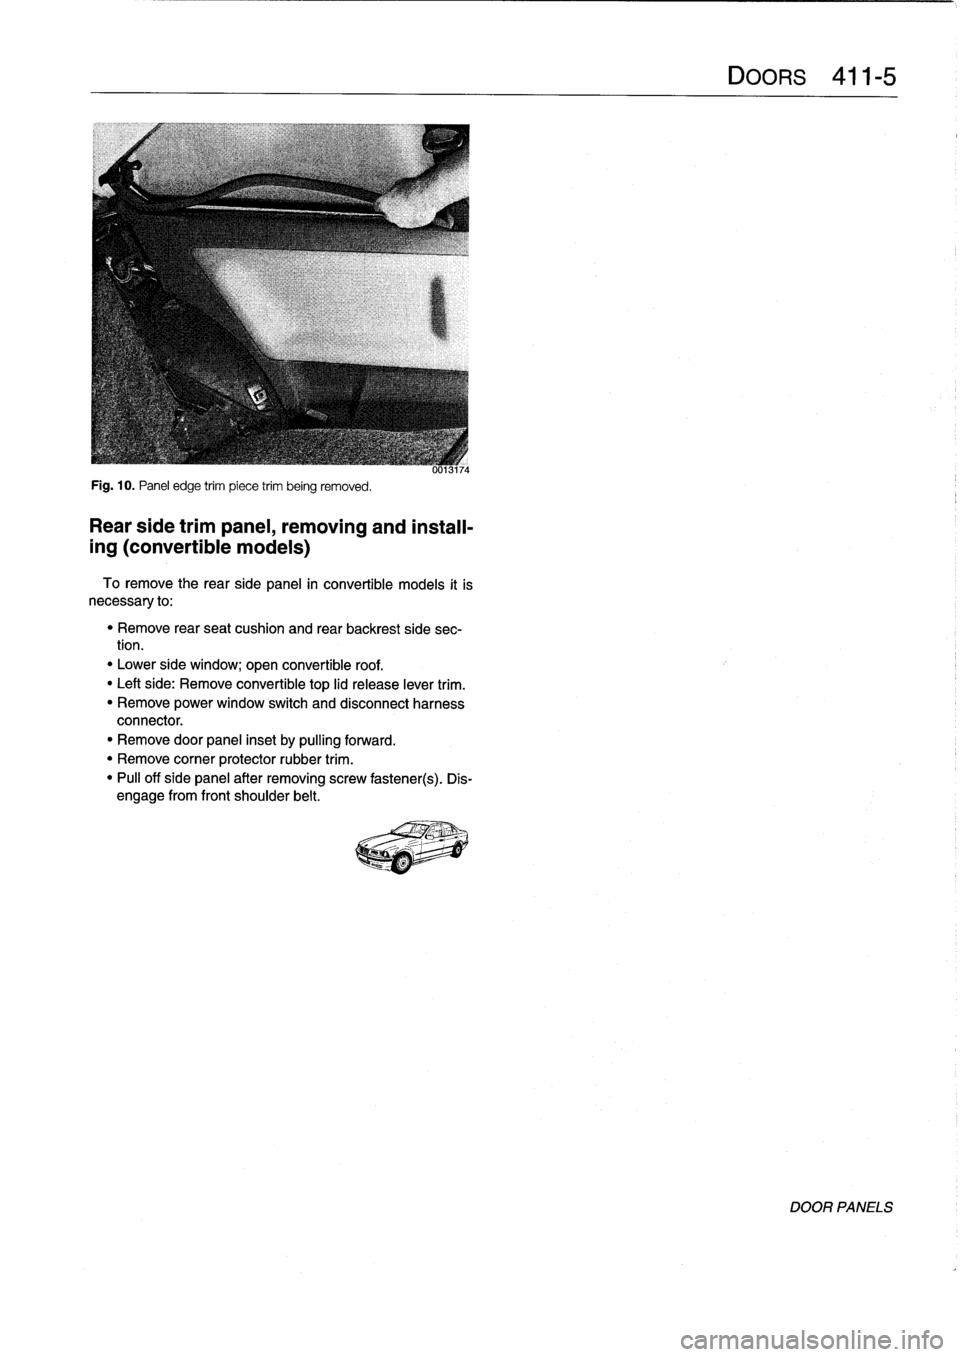 BMW 328i 1997 E36 Workshop Manual 
Fig
.
10
.
Panel
edge
trim
piece
trim
being
removed
.

Rear
side
trimpanel,
removing
and
install-

ing
(convertible
models)

To
remove
the
rearside
panel
in
convertible
models
it
is
necessary
to
:

"